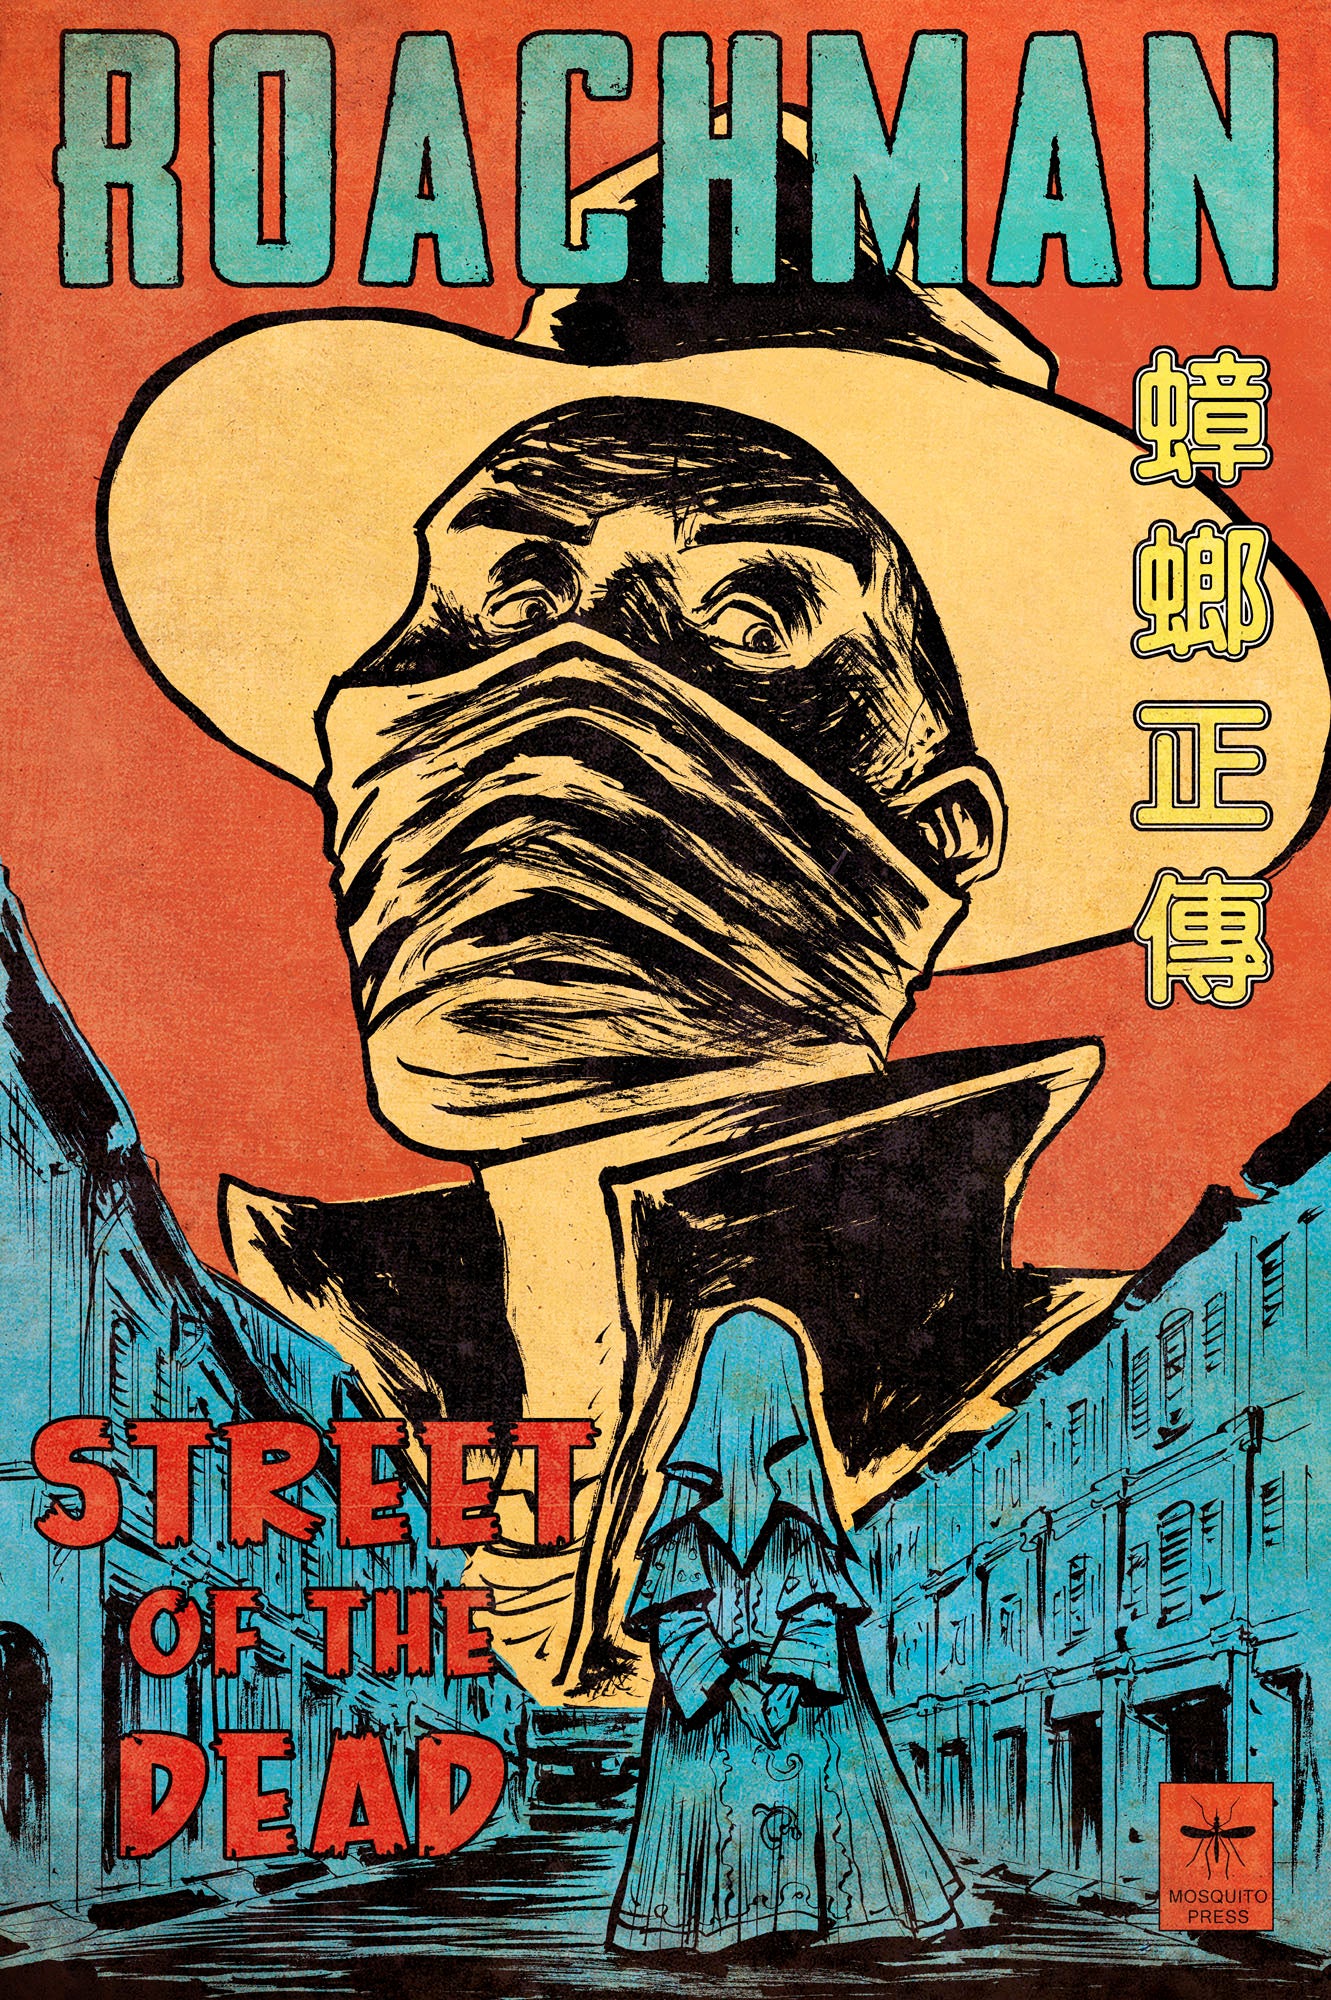 Sonny Liew, "Roachman No. 22: Street of the Dead (Cover)"